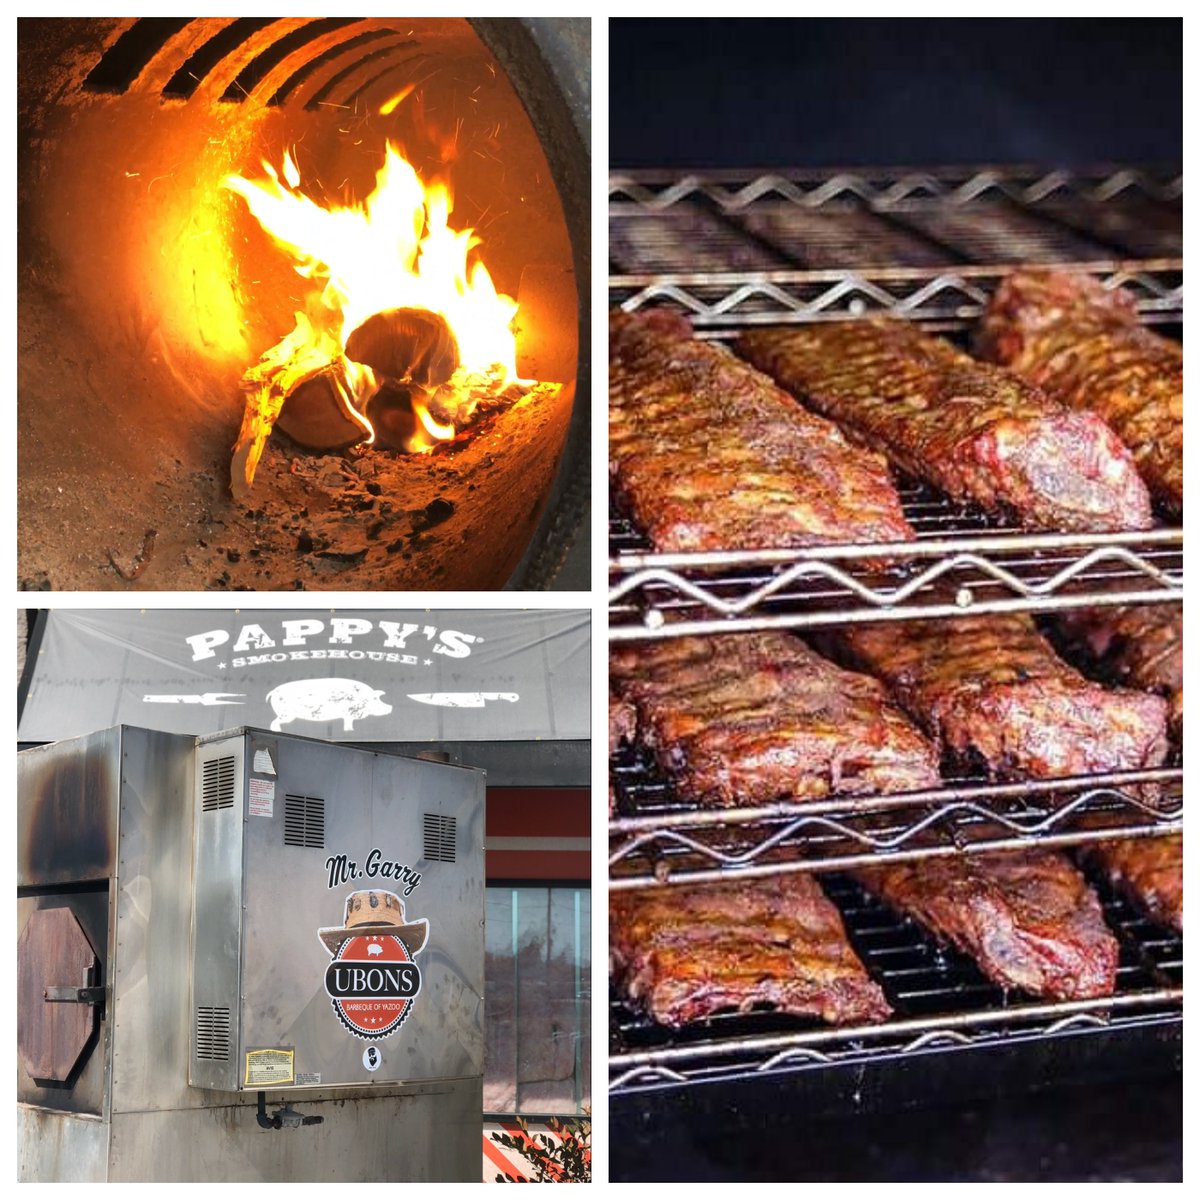 Smokers are fired up, and our crew is ready to get back to doing what we love! Serving you! 🔥😋🙌

#pappysstpeters #pappyssmokehouse #bbq #barbecue #meat #food #bbqlife #bbqfoodie #ribs #porkribs #stpeters #stcharleseats